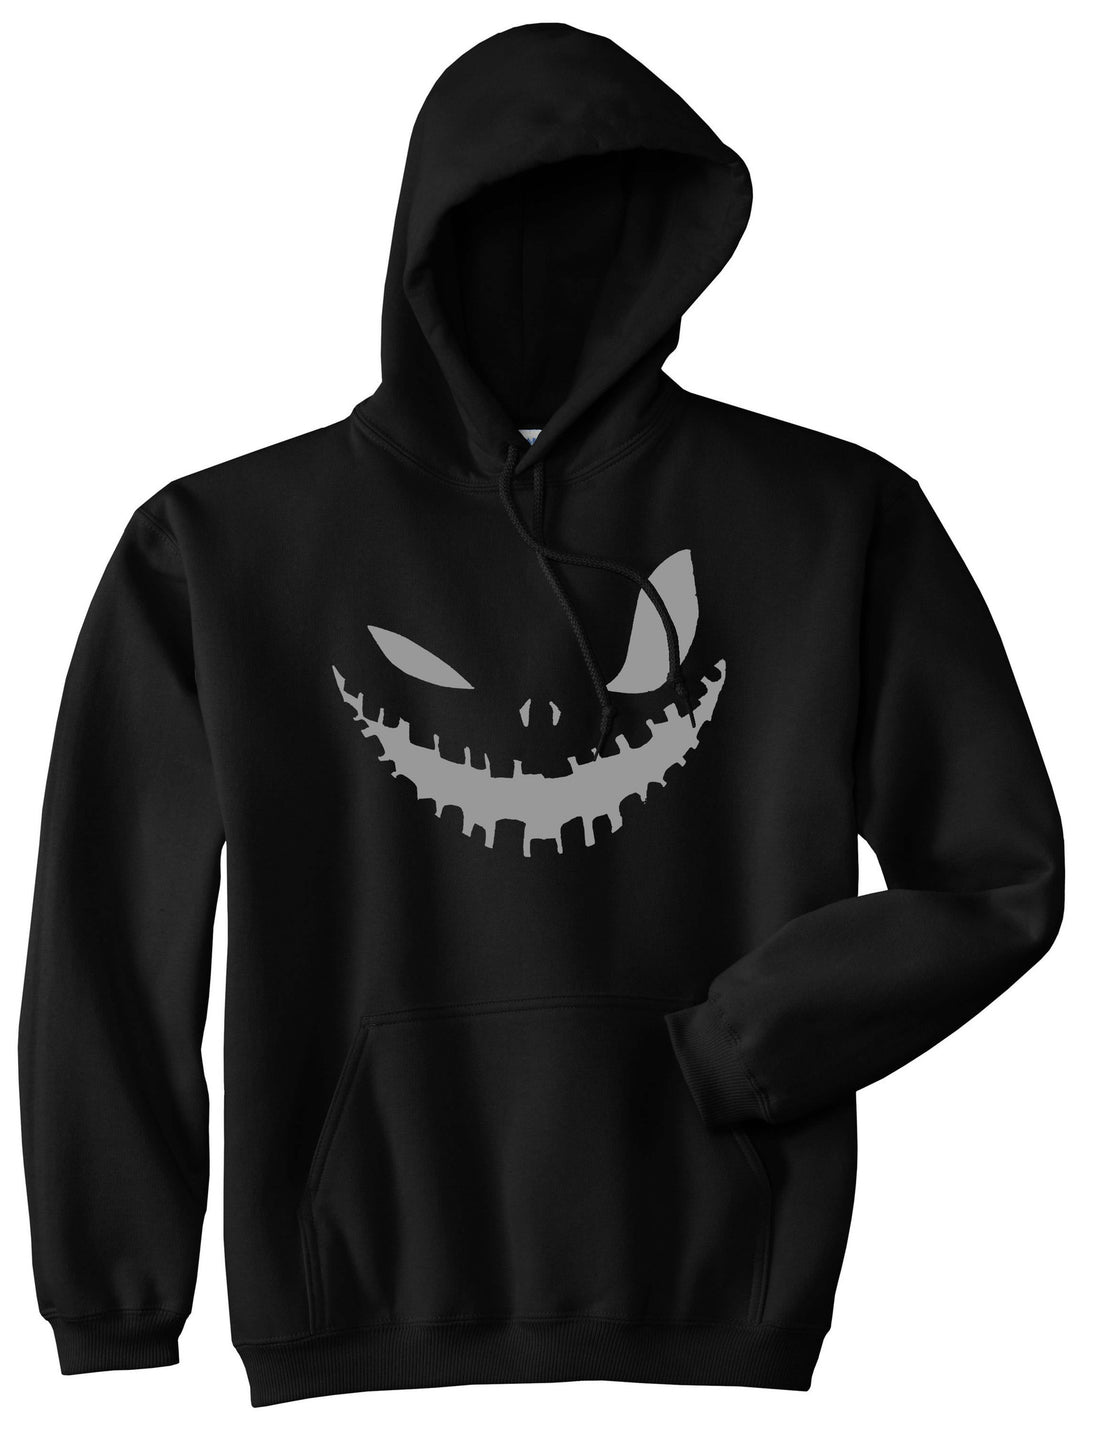 Scary Jack-o-lantern Face Halloween Pullover Hoodie